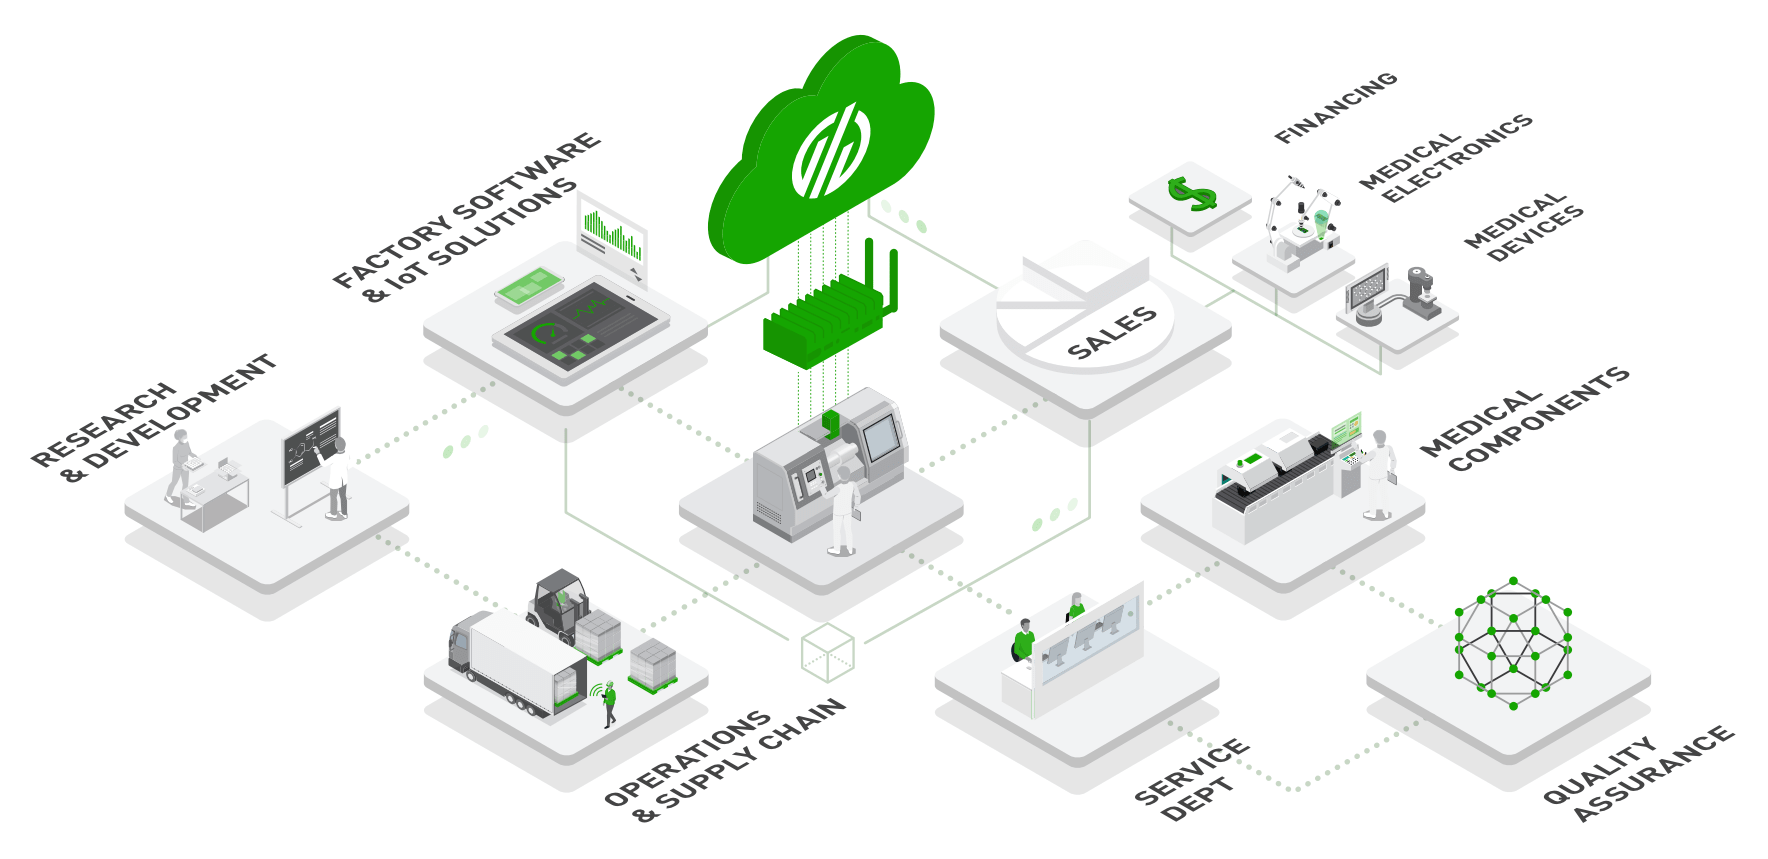 Complete Guide to IIoT (Industrial Internet of Things)